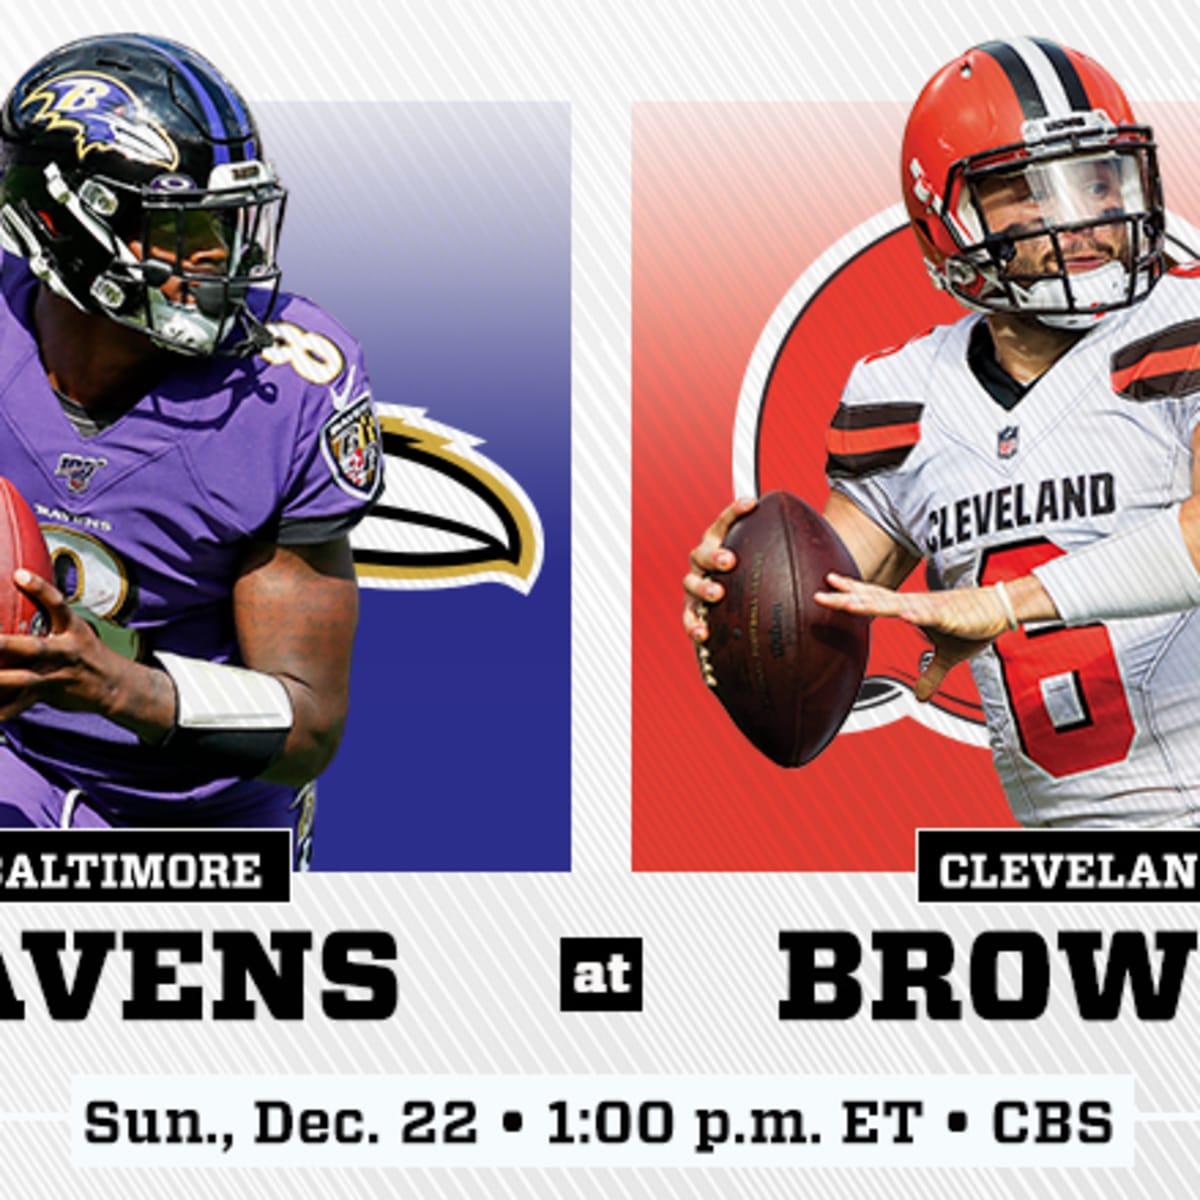 ravens vs browns play by play